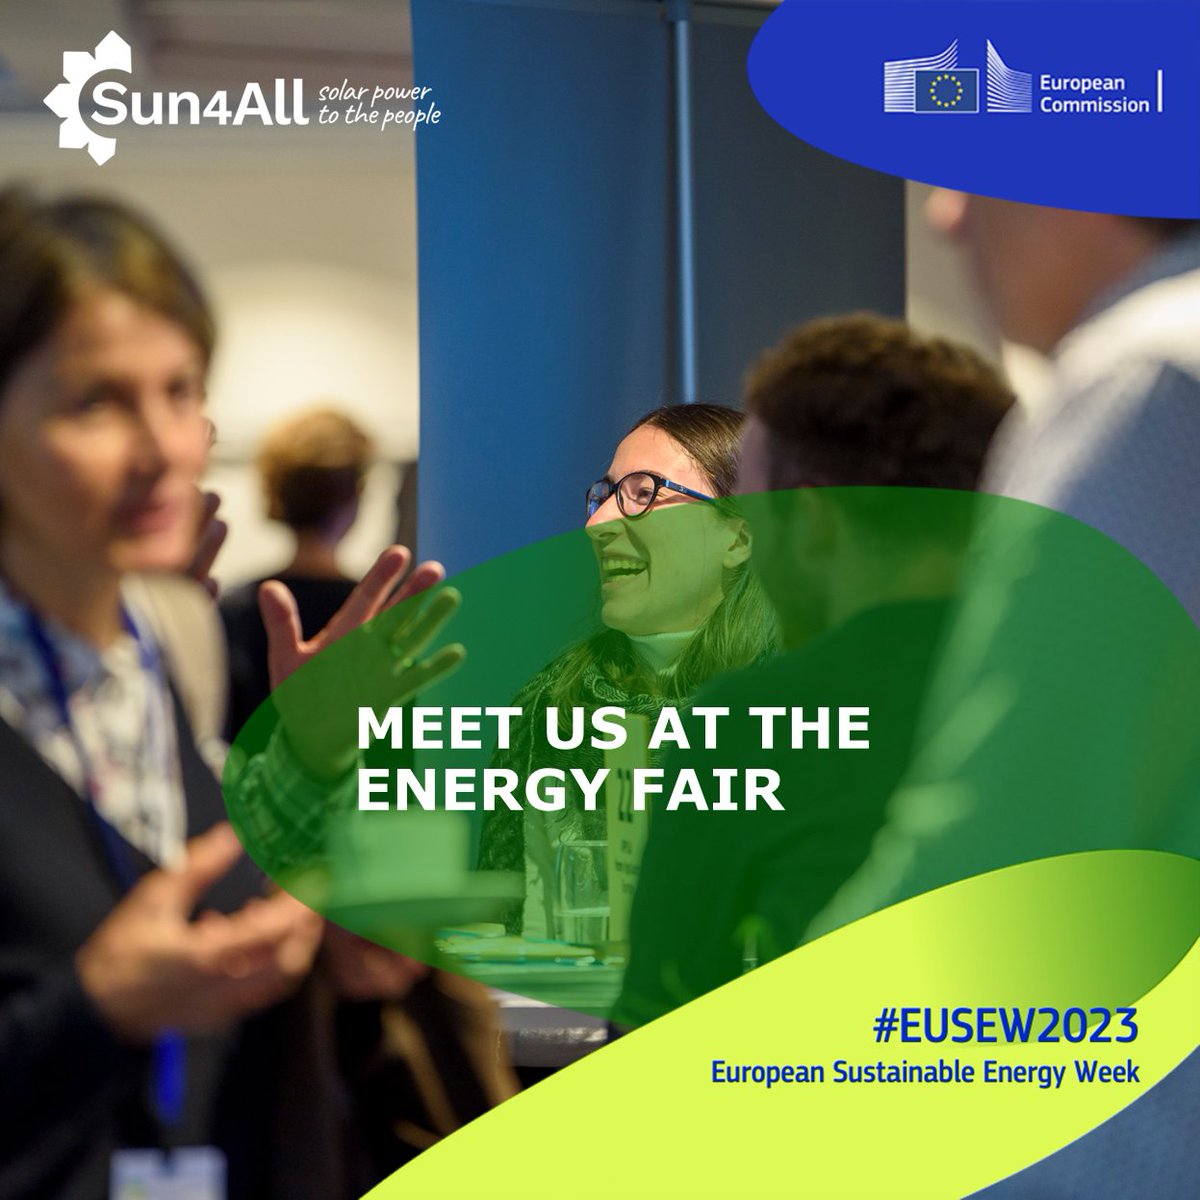 Come and visit us at @ICLEI_Europe´s stand! 🖐️ ec.europa.eu/eusew
We’ll be taking part in the #EUSEW2023 Energy Fair to network  with you and share our experiences boosting the EU #energytransition! 🚀
@KerneisKlervi